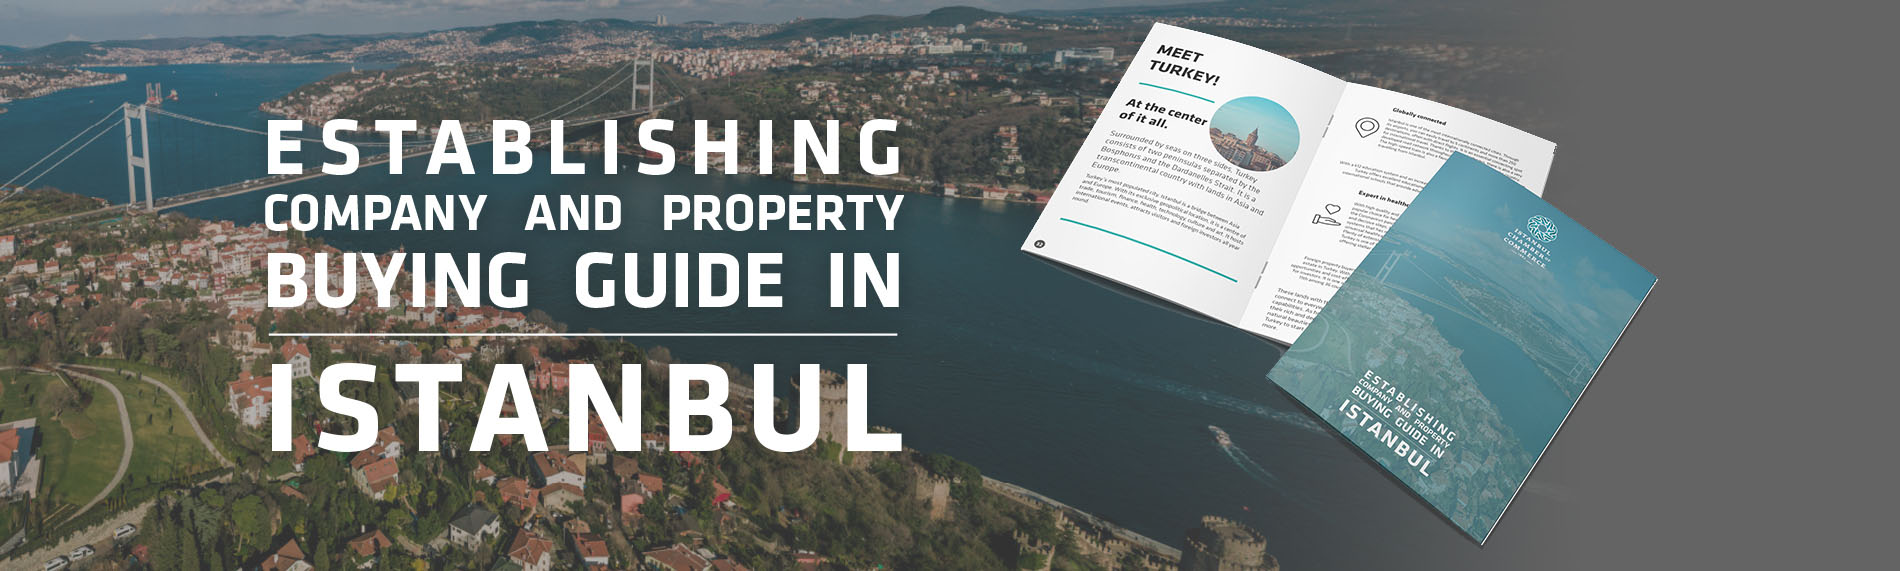 Establishing Company and Property Buying Guide in Istanbul